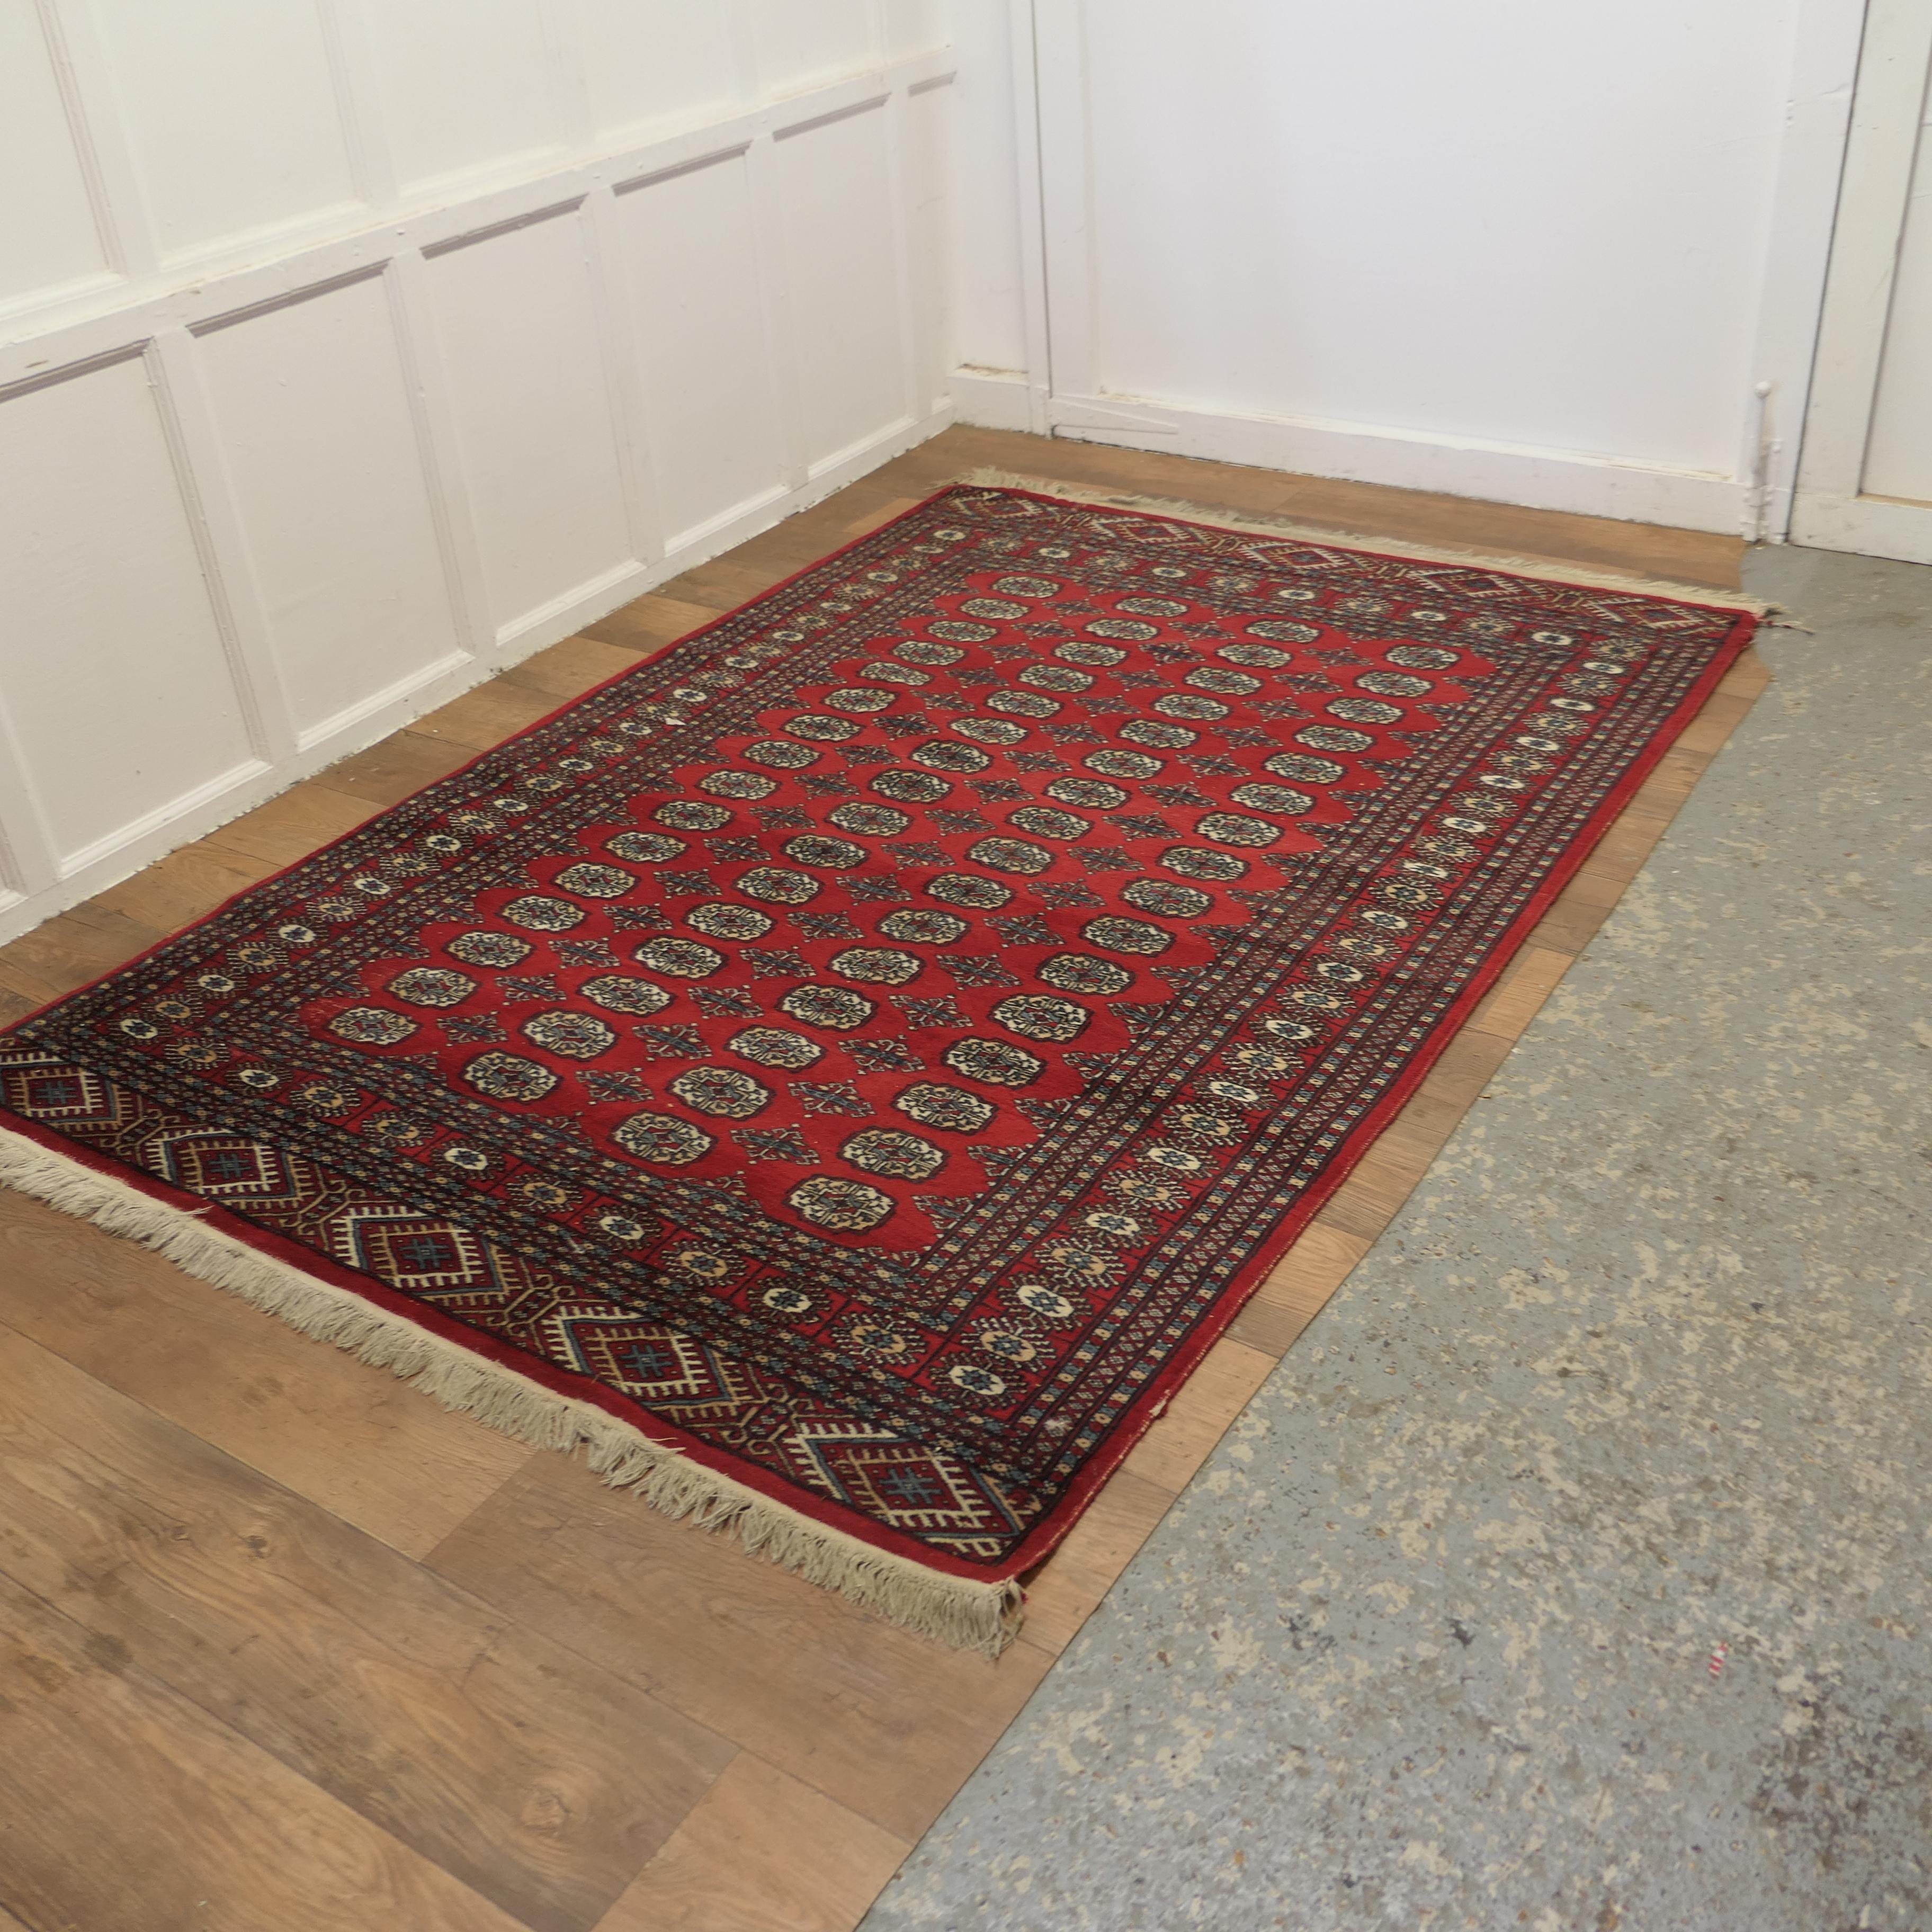 Folk Art A Lovely Bright Red Wool Rug  The Carpet is a wonderful Bright colour   For Sale